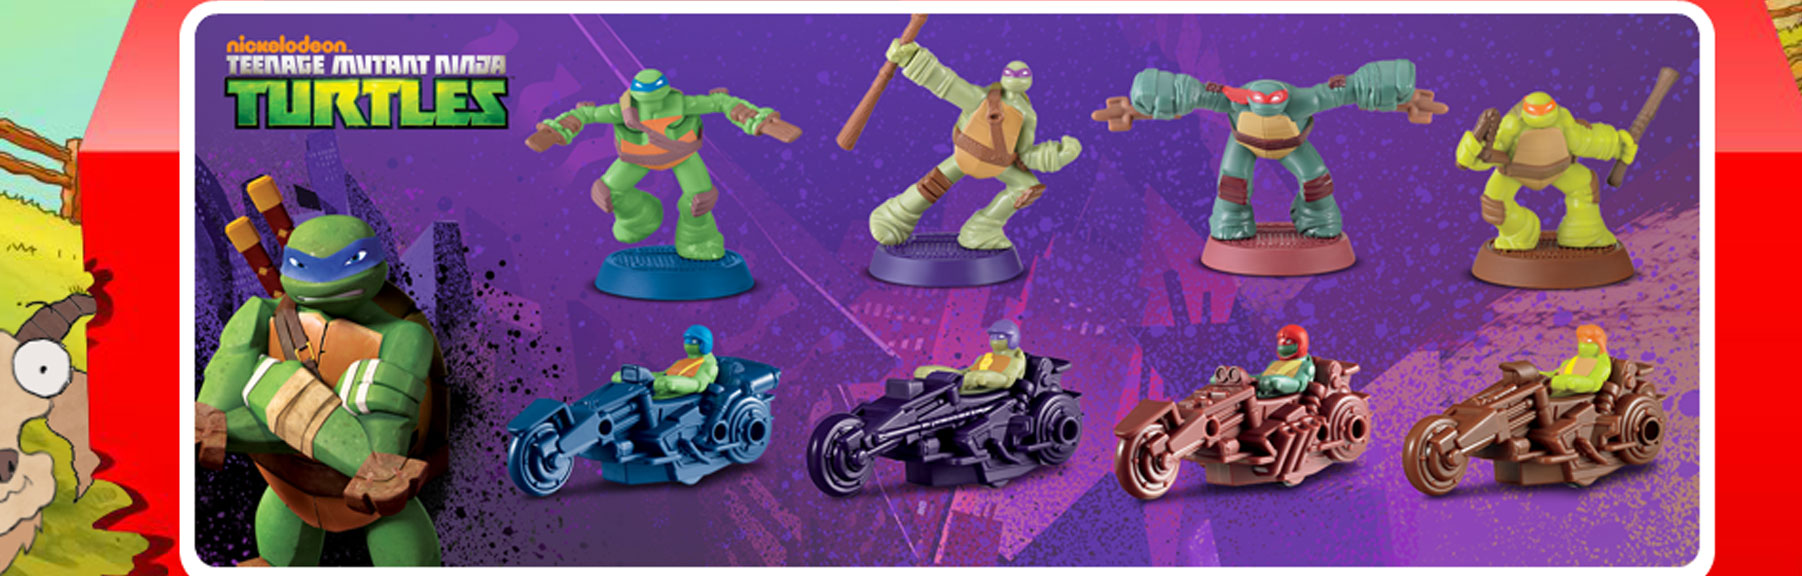 TMNT HAPPY MEAL 